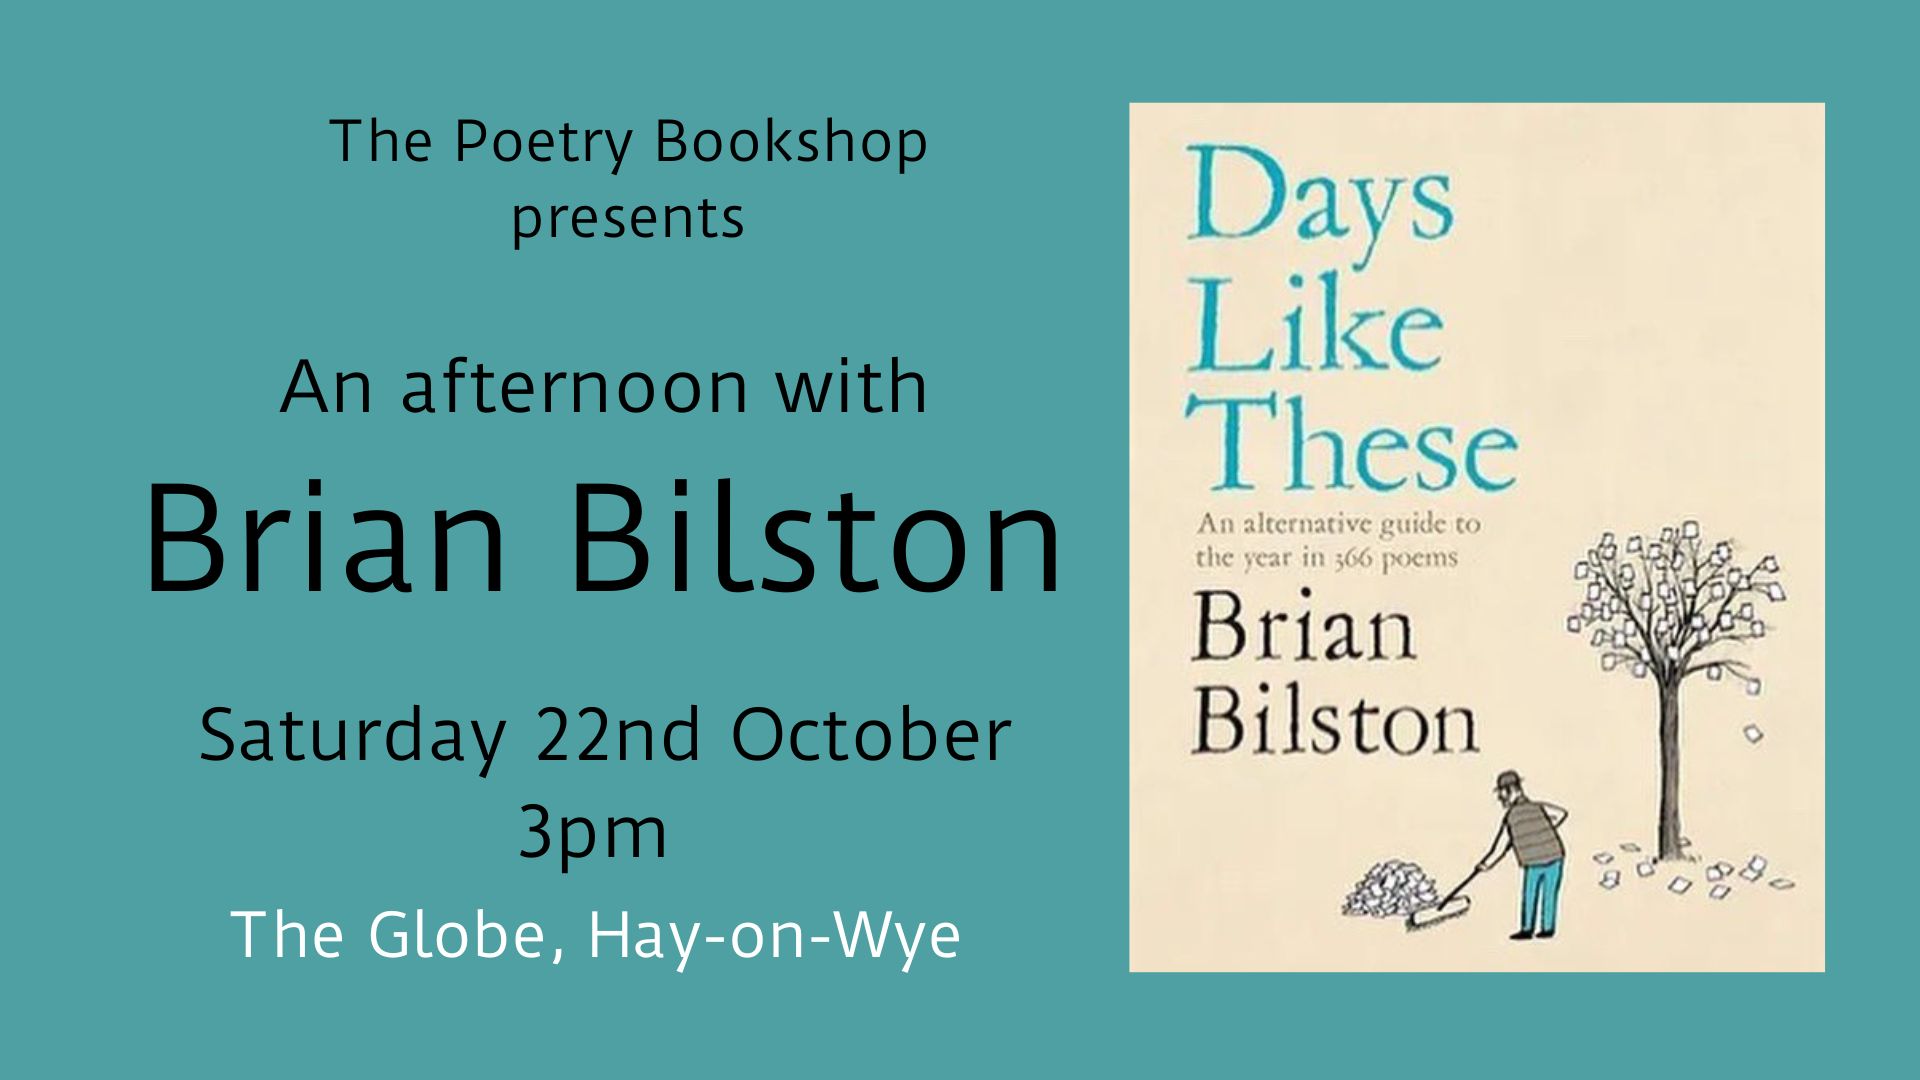 Pciture of Brian Bilston's new book with the caption THe Poetry Bookshop presents and aftrernoon with Brian Bilston, Saturday 22nd October at 3pm The Globe, Hay-on-Wye